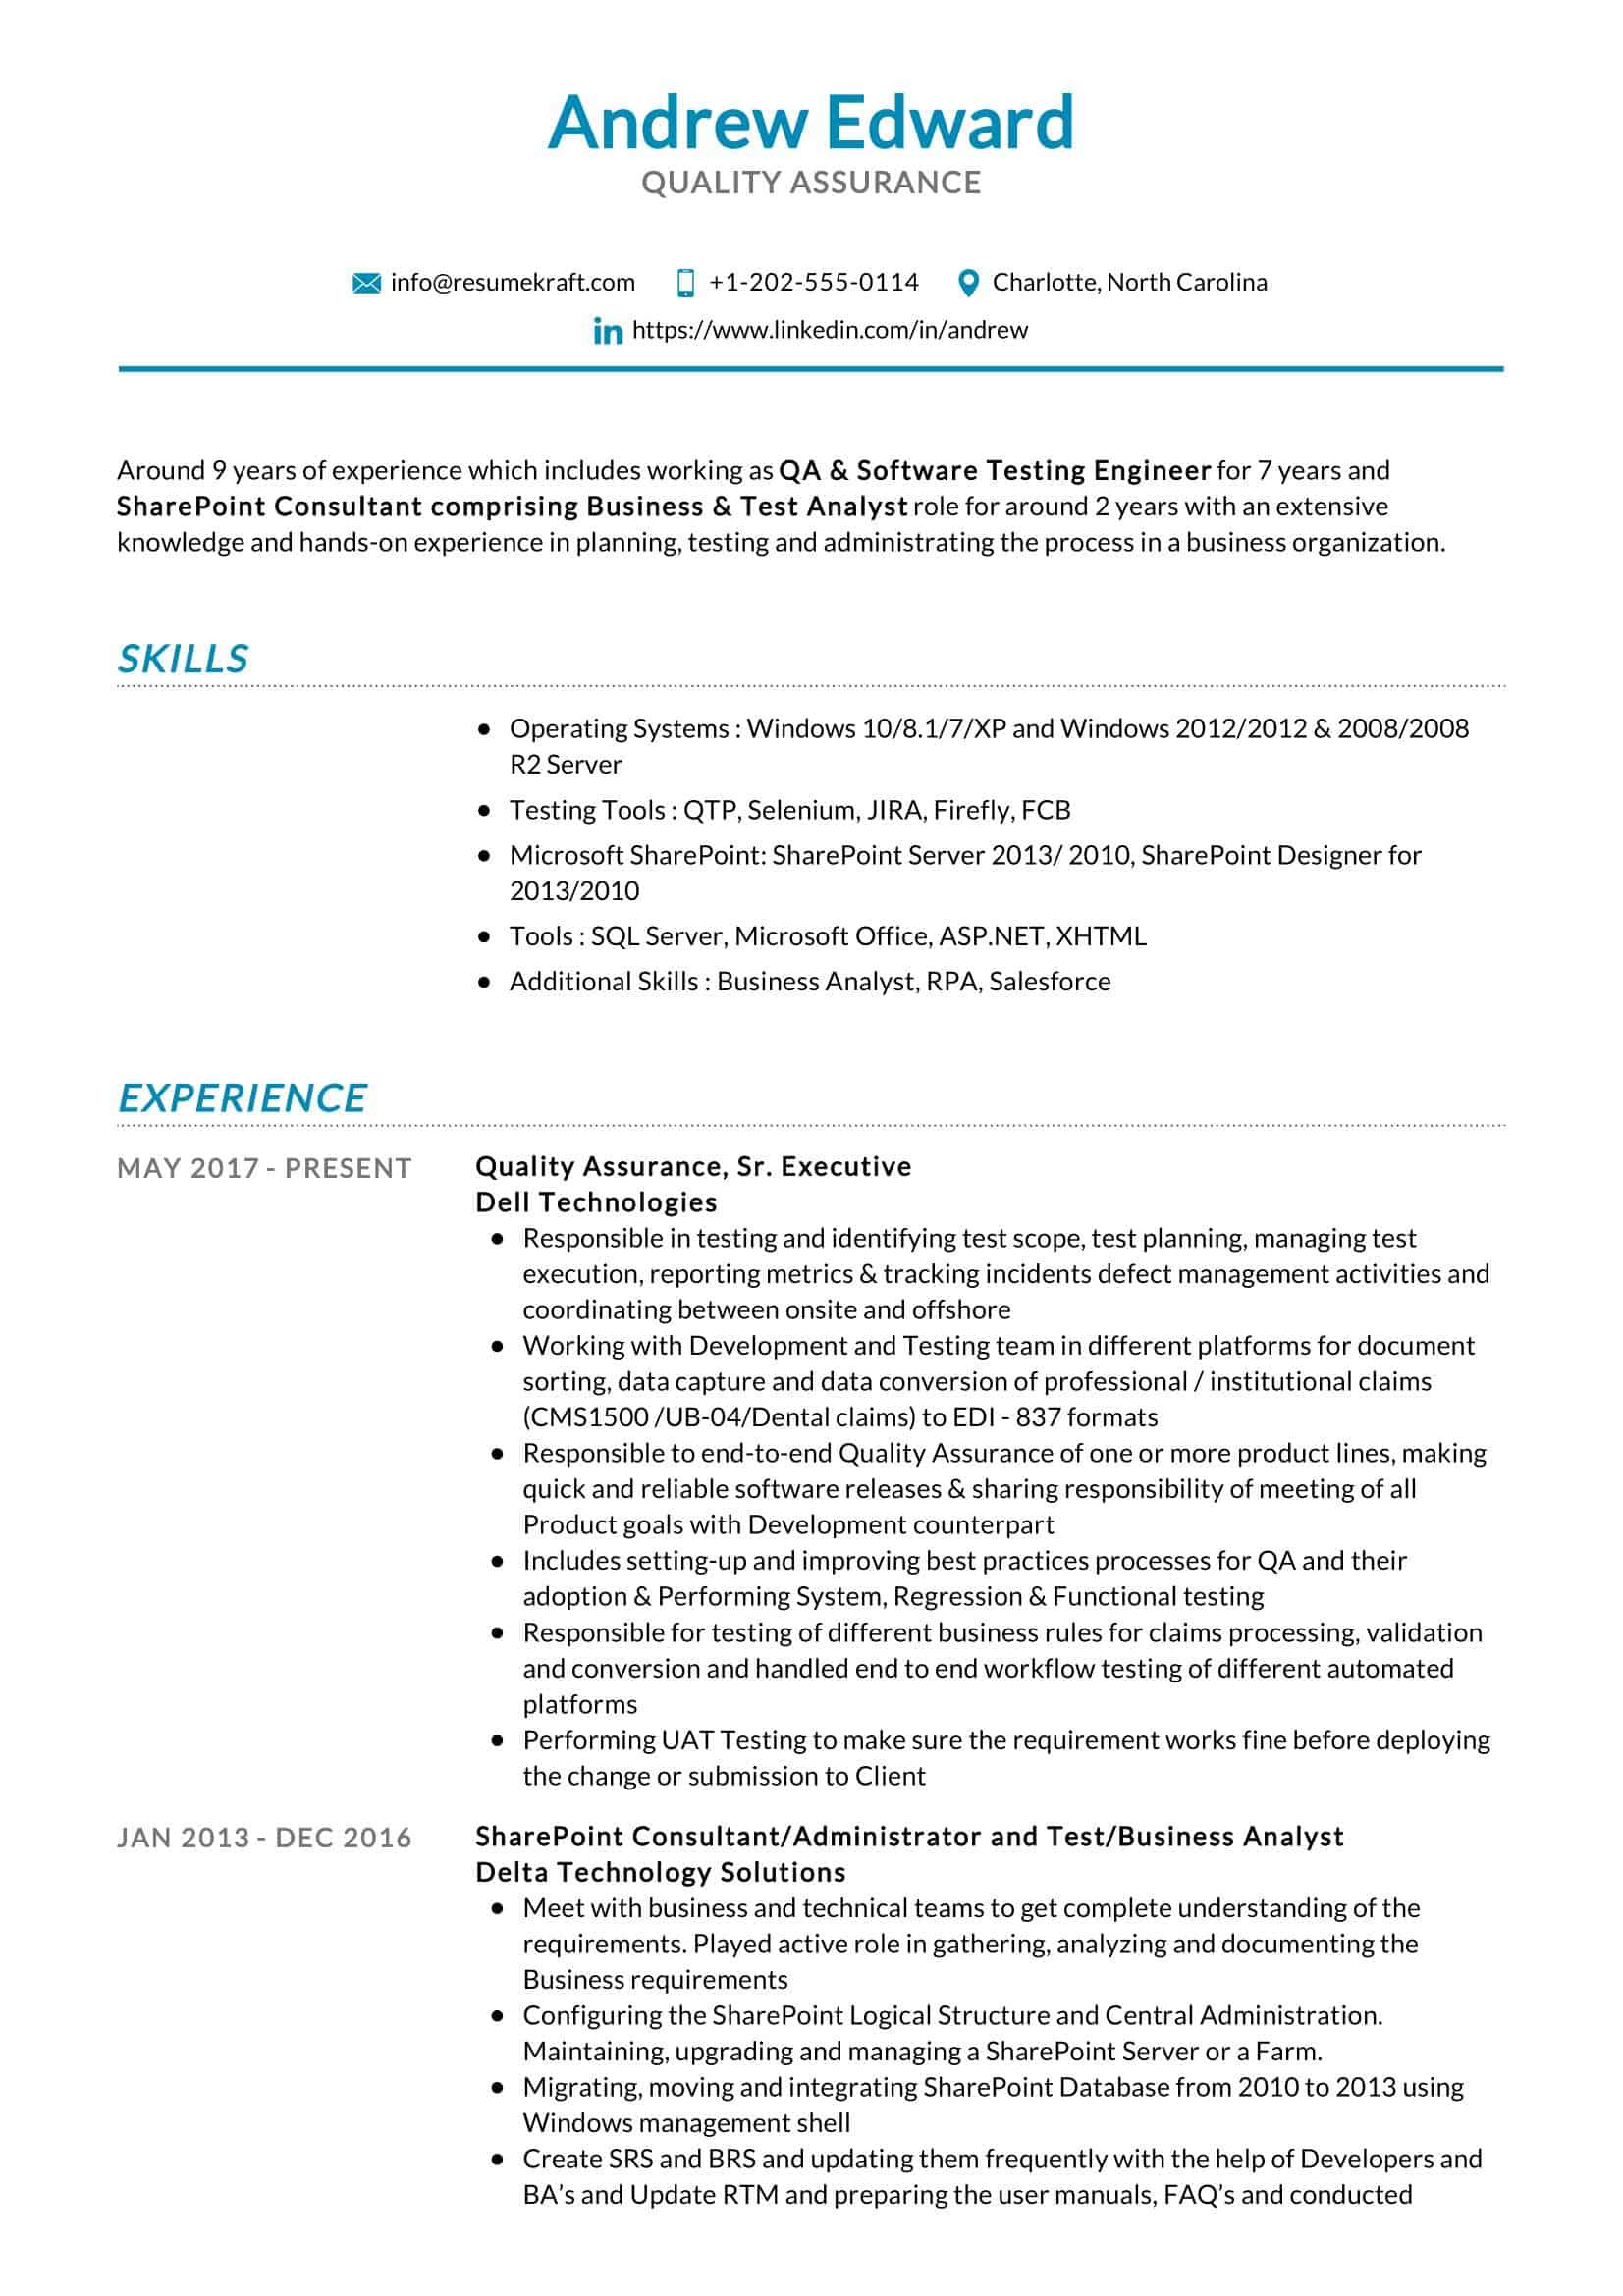 Software Qa Resume Samples with No Work Experience Quality assurance Resume Sample 2022 Writing Tips – Resumekraft